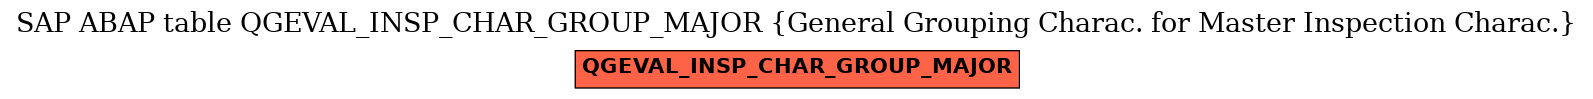 E-R Diagram for table QGEVAL_INSP_CHAR_GROUP_MAJOR (General Grouping Charac. for Master Inspection Charac.)